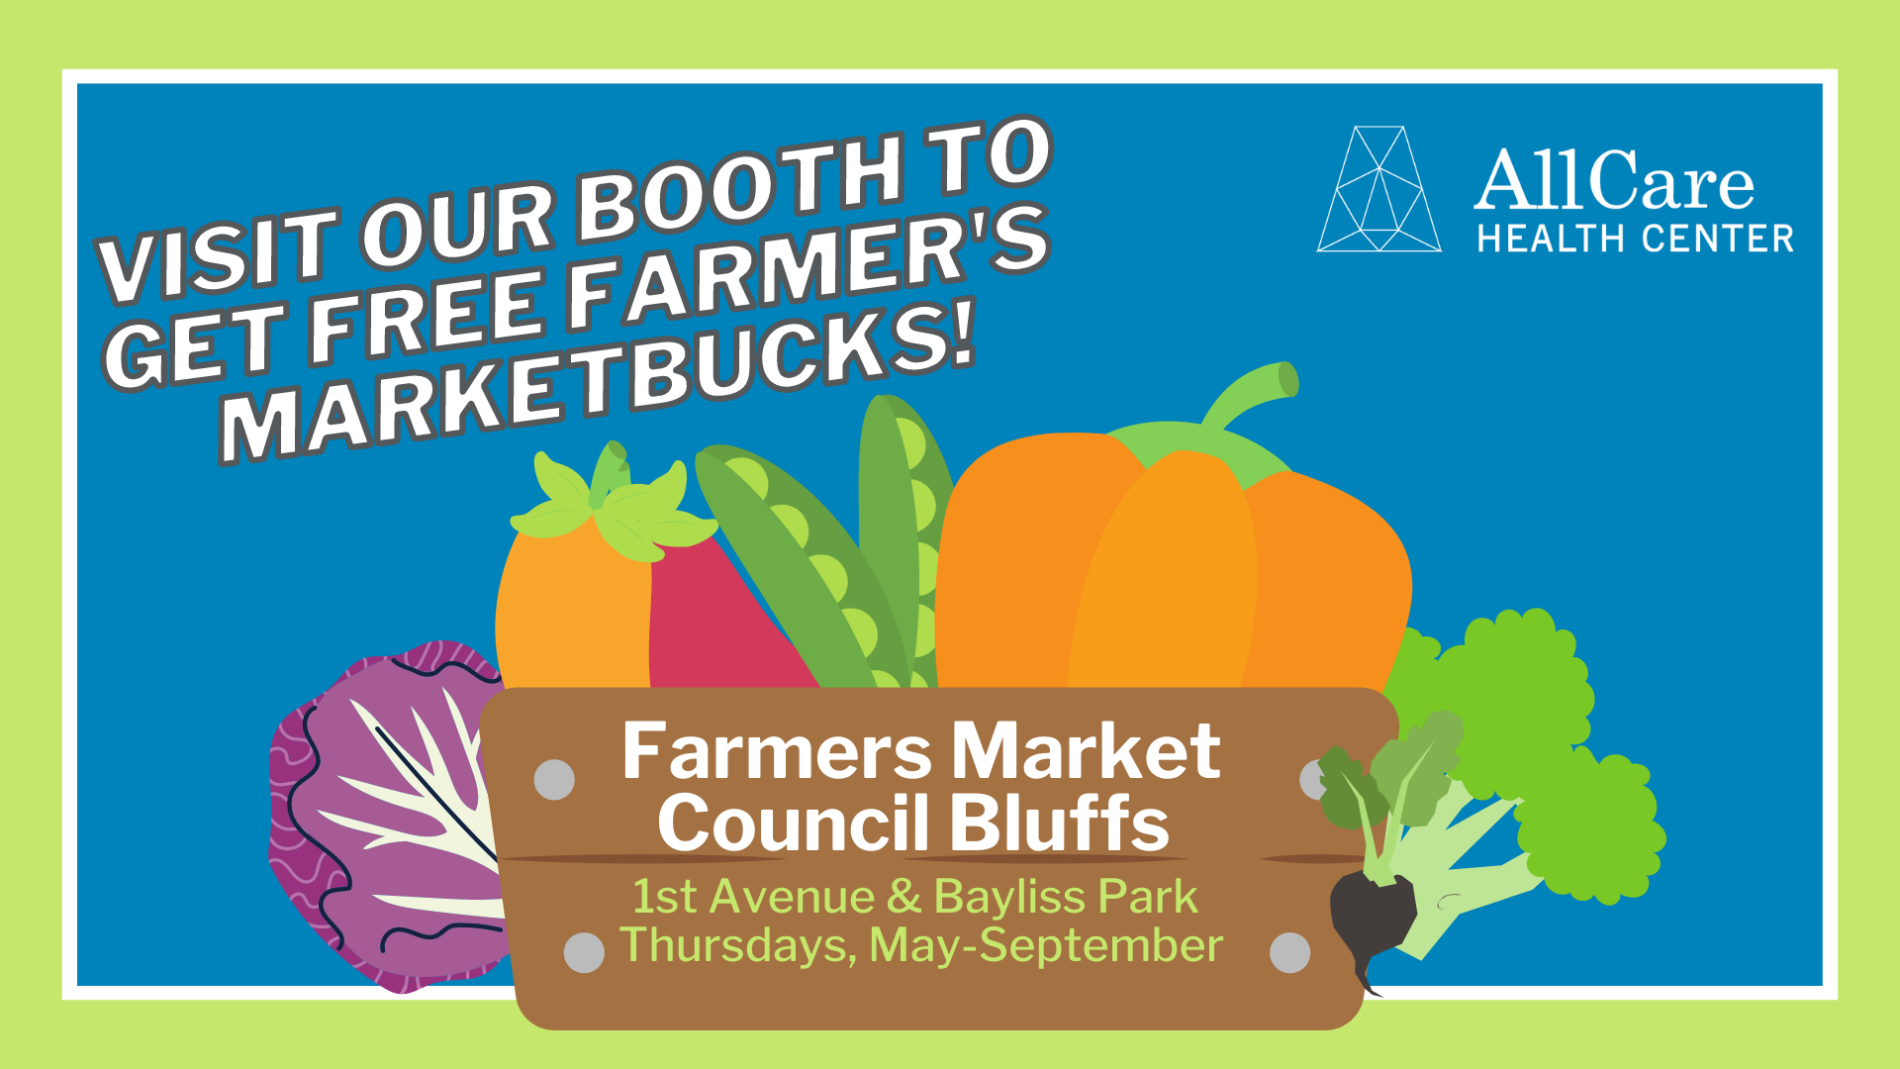 Come check out our weekly booth at the Farmers Market Council Bluffs at Bayliss Park!